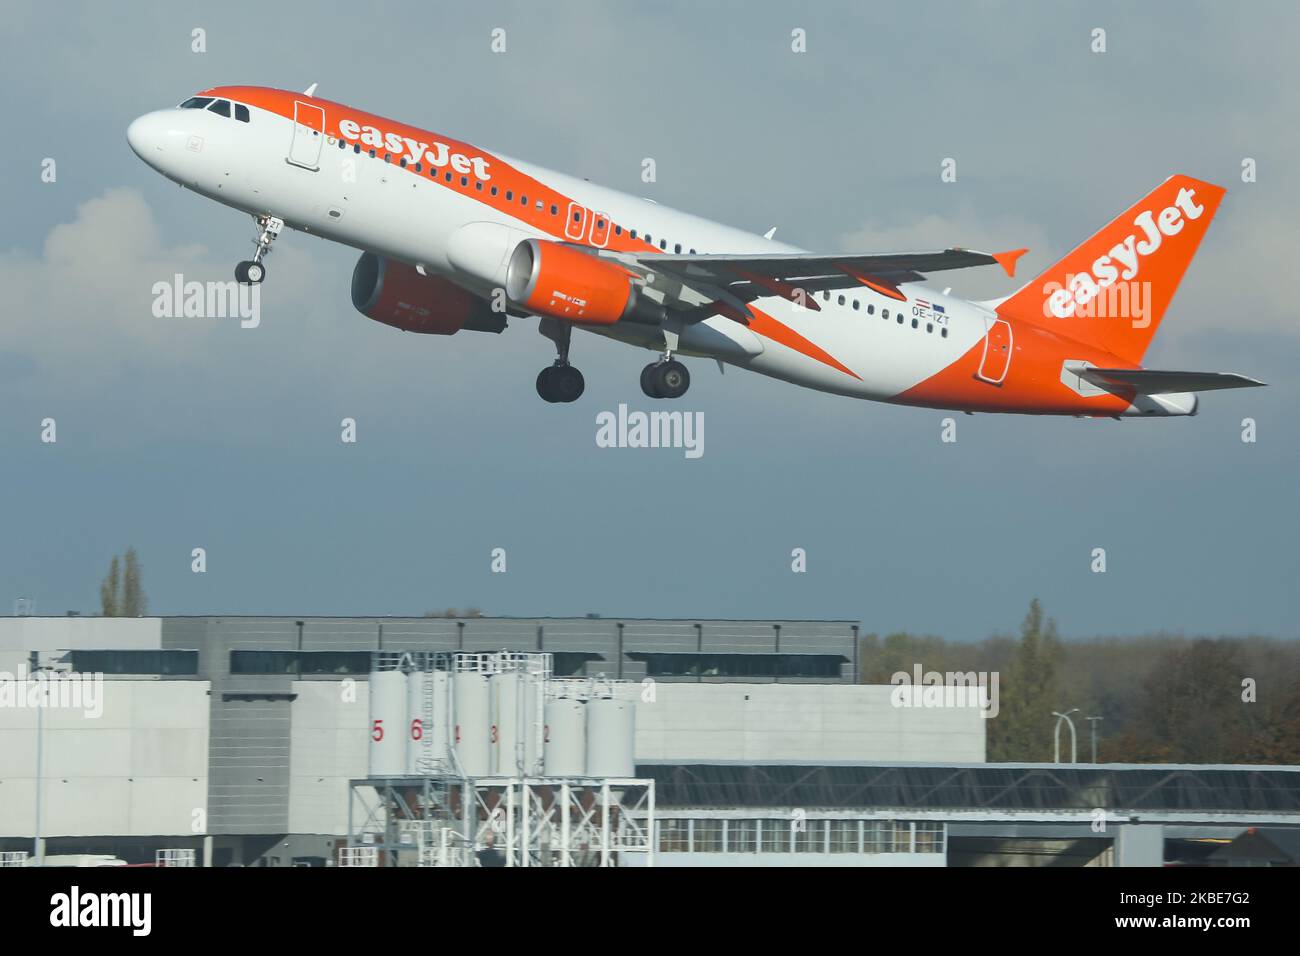 An EasyJet Europe Airline Airbus A320-200 narrow body commercial airplane as seen on rotation and take off from Brussels Internation Airport Zaventem BRU EBBR during a blue sky day on 11 January 2020in Brussels, Belgium. The aircraft has the registration OE-IZT with 2x CMFI jet engines. EasyJet Europe is an Austrian low-cost airline based in Vienna Austria subsidiary of the British low cost budget airline Easy Jet. The carrier connects the Belgian capital to Basel Mulhouse, Geneva, Berlin Tegel, Bordeaux and Nice. (Photo by Nicolas Economou/NurPhoto) Stock Photo